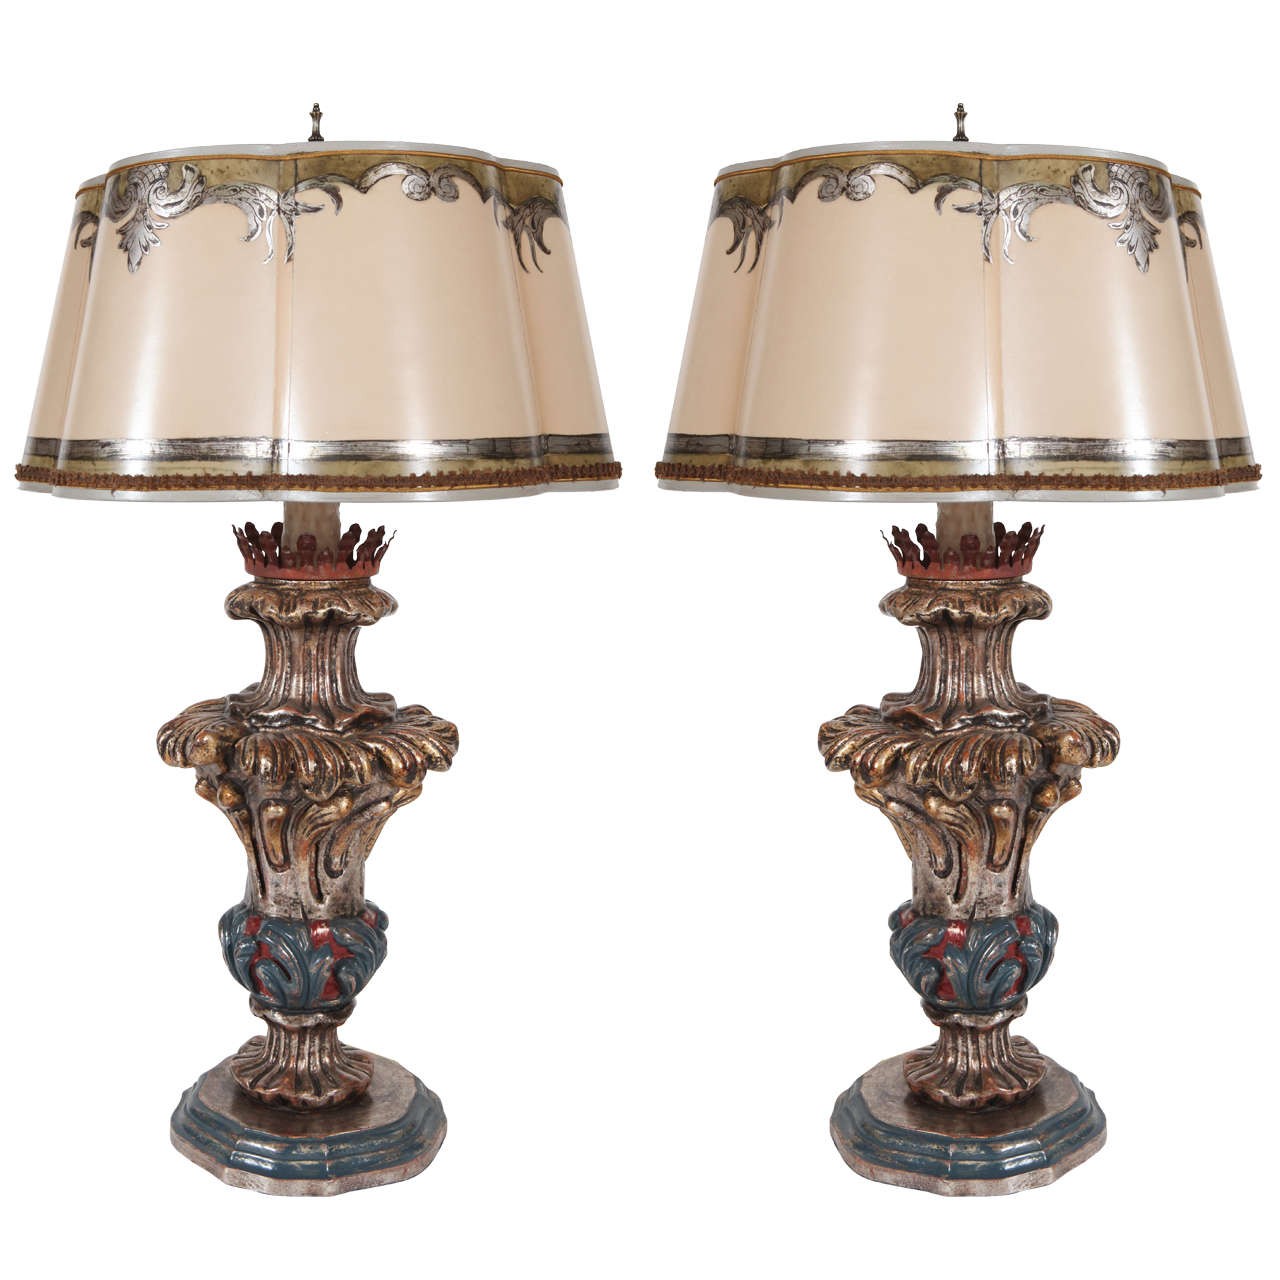 Pair of italian style table lamps for sale at 1stdibs